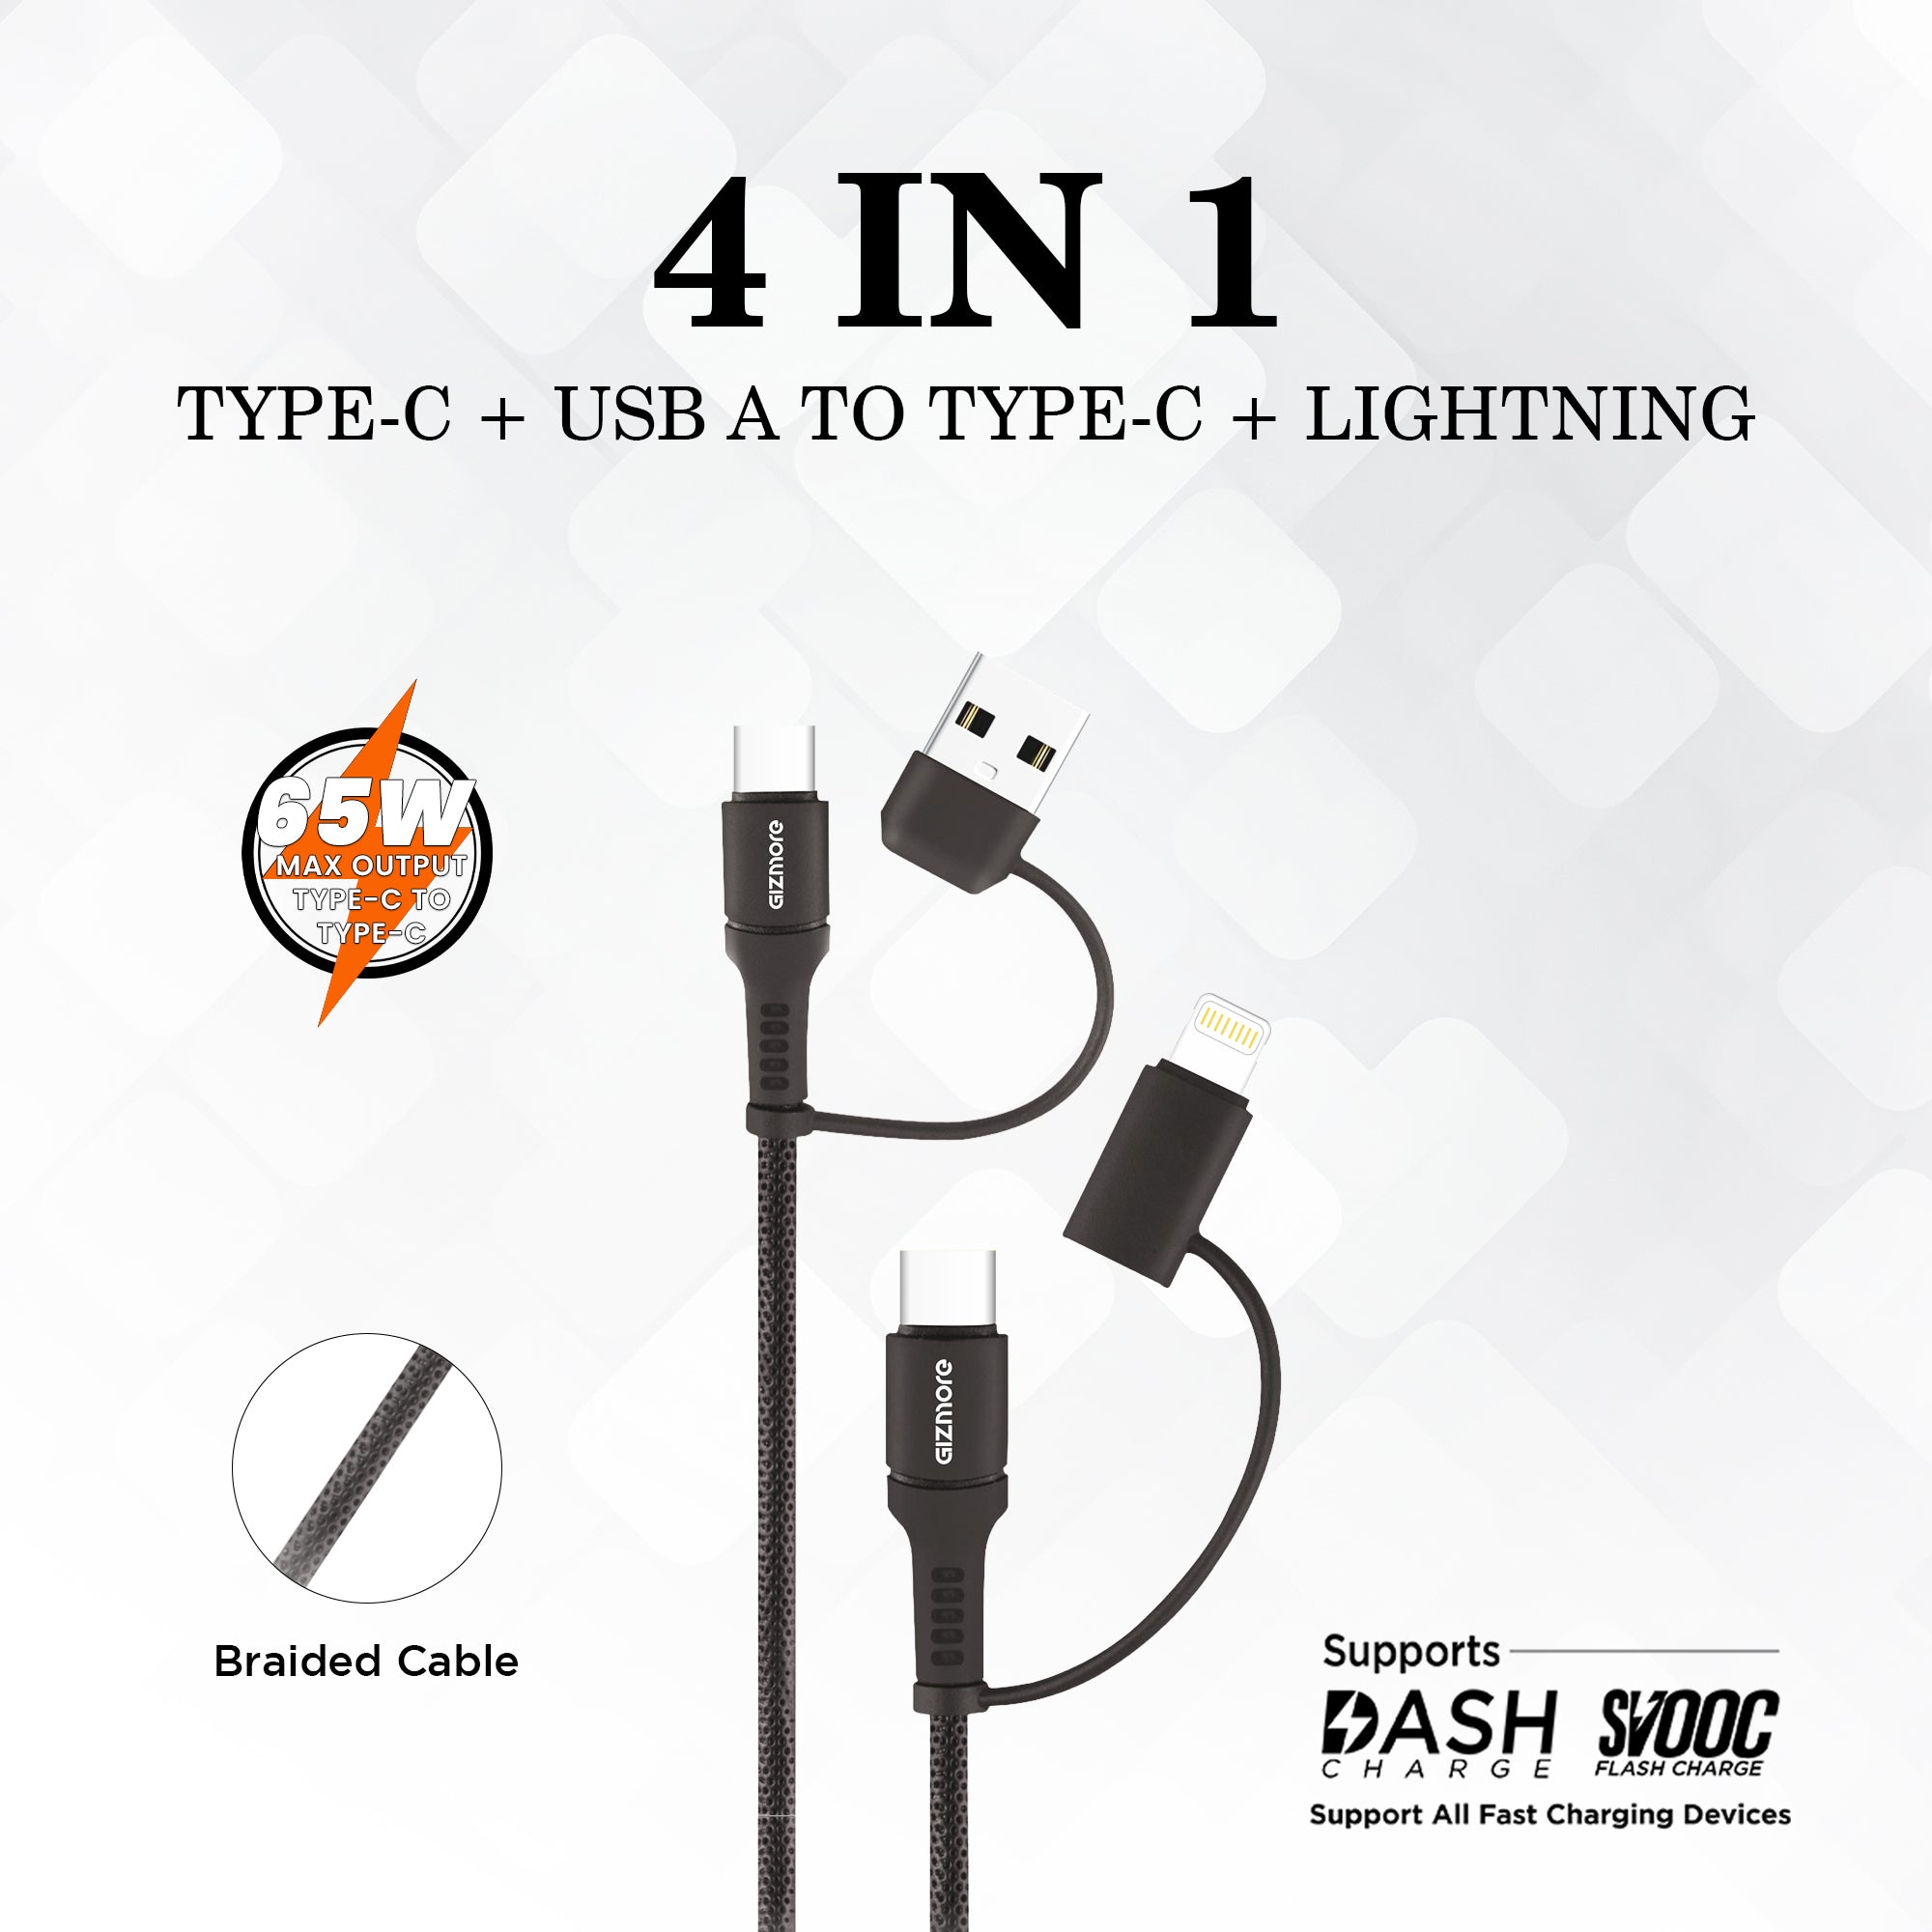 GIZMORE Super-Fast Multi-Connector 4-in-1 Type-C & Lightning Cable with 65W Fast Charging, 480Mbps Data Sync, PD Technology, Compatible with All Type-C and Apple Devices